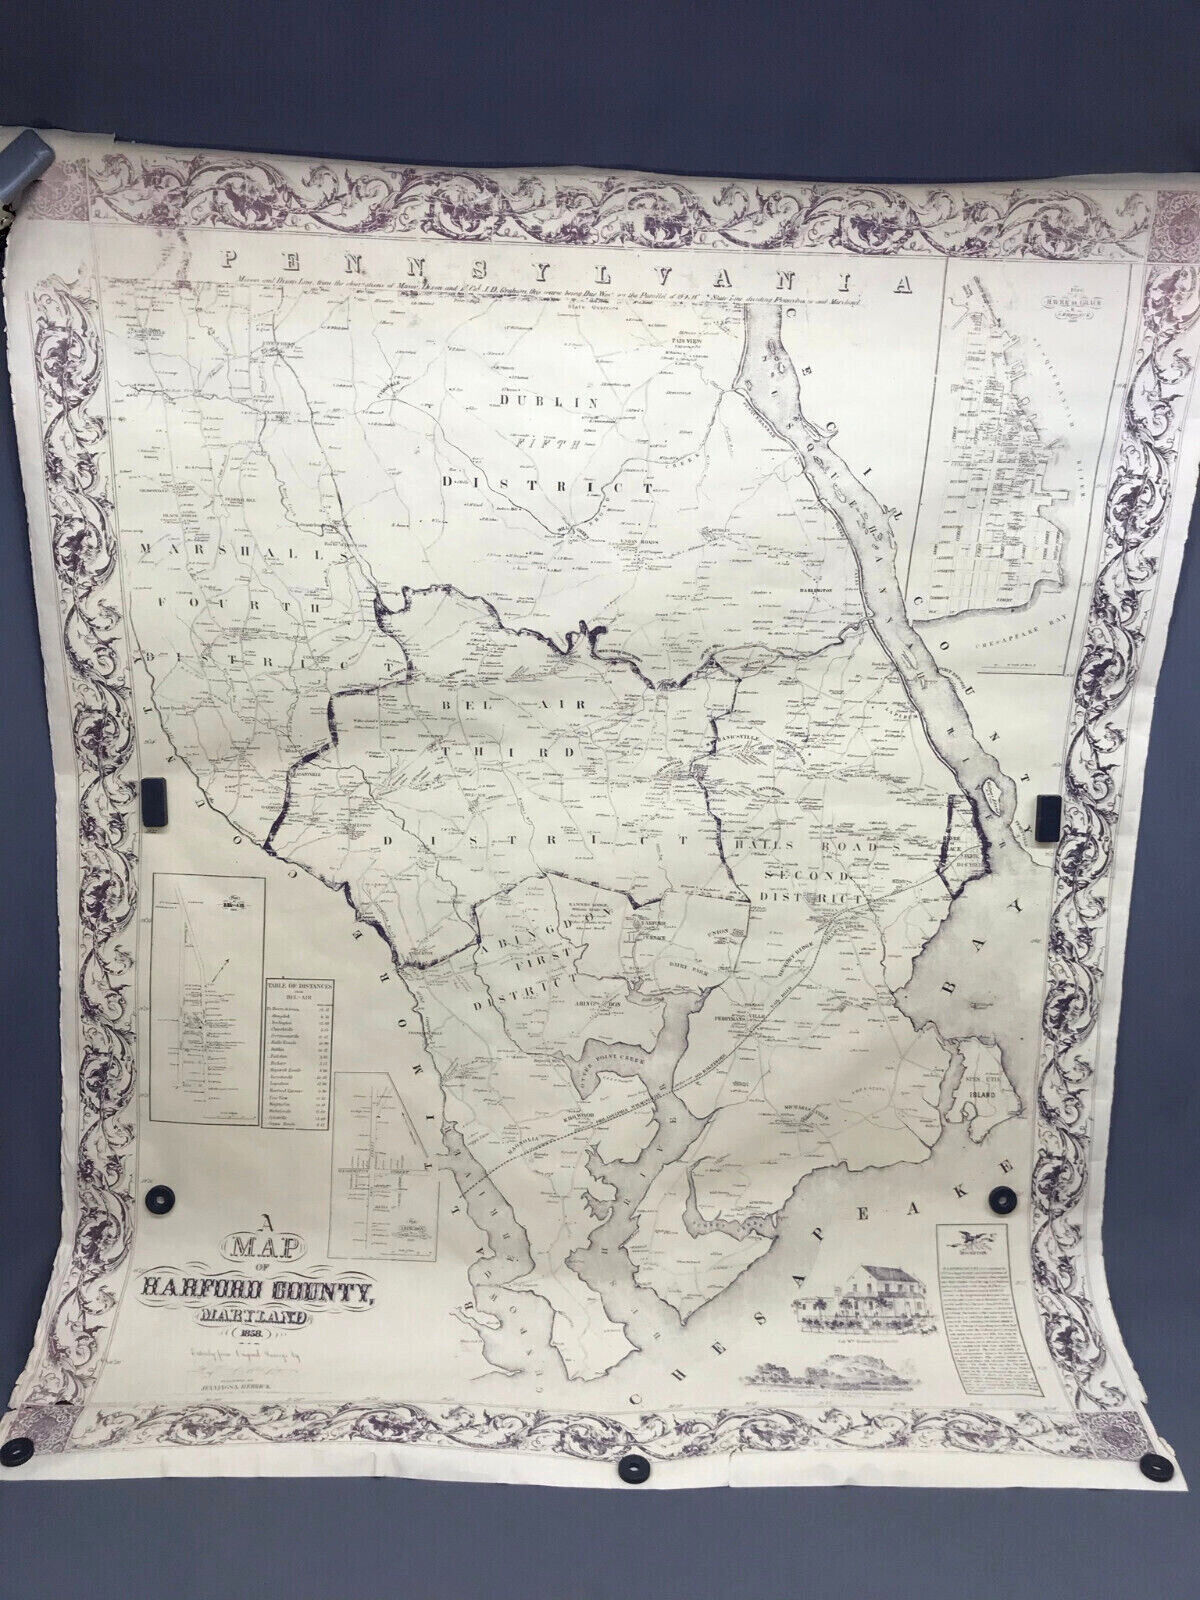 Large HARFORD COUNTY MARYLAND Vintage Repro of Original 1858 Antique Wall Map